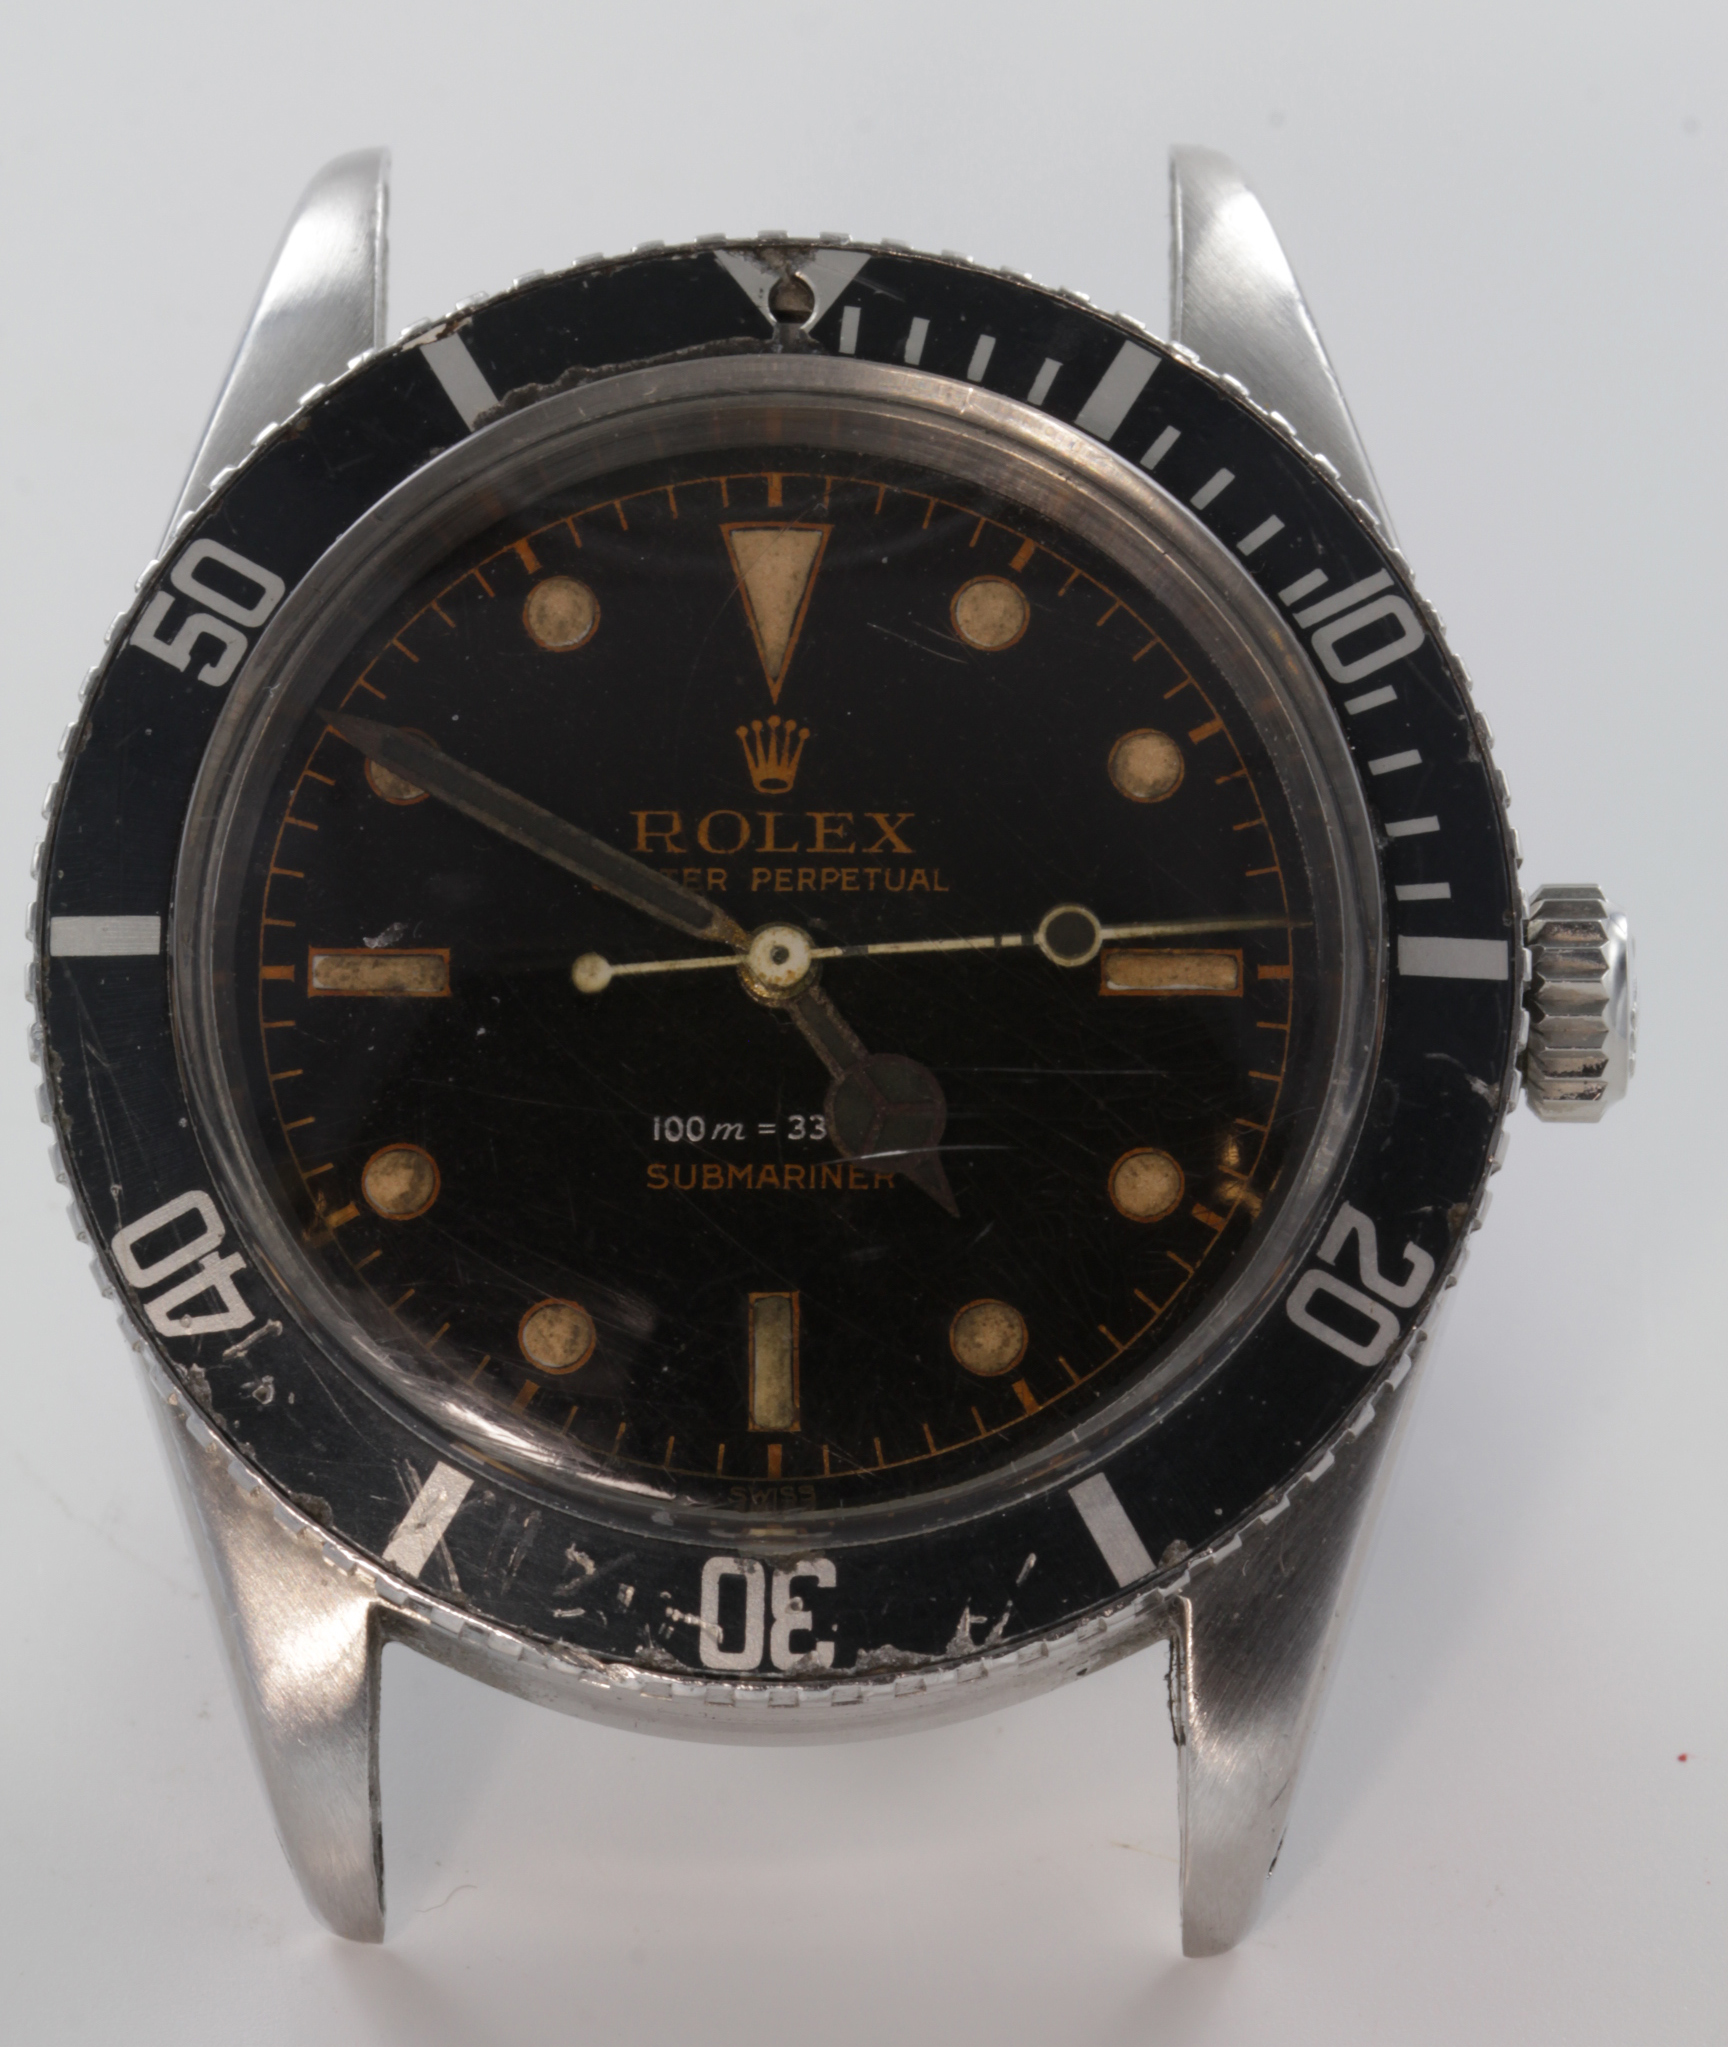 Rolex Oyster Perpetual Submariner 6538/6 (small crown) wristwatch, circa 1956, black dial with